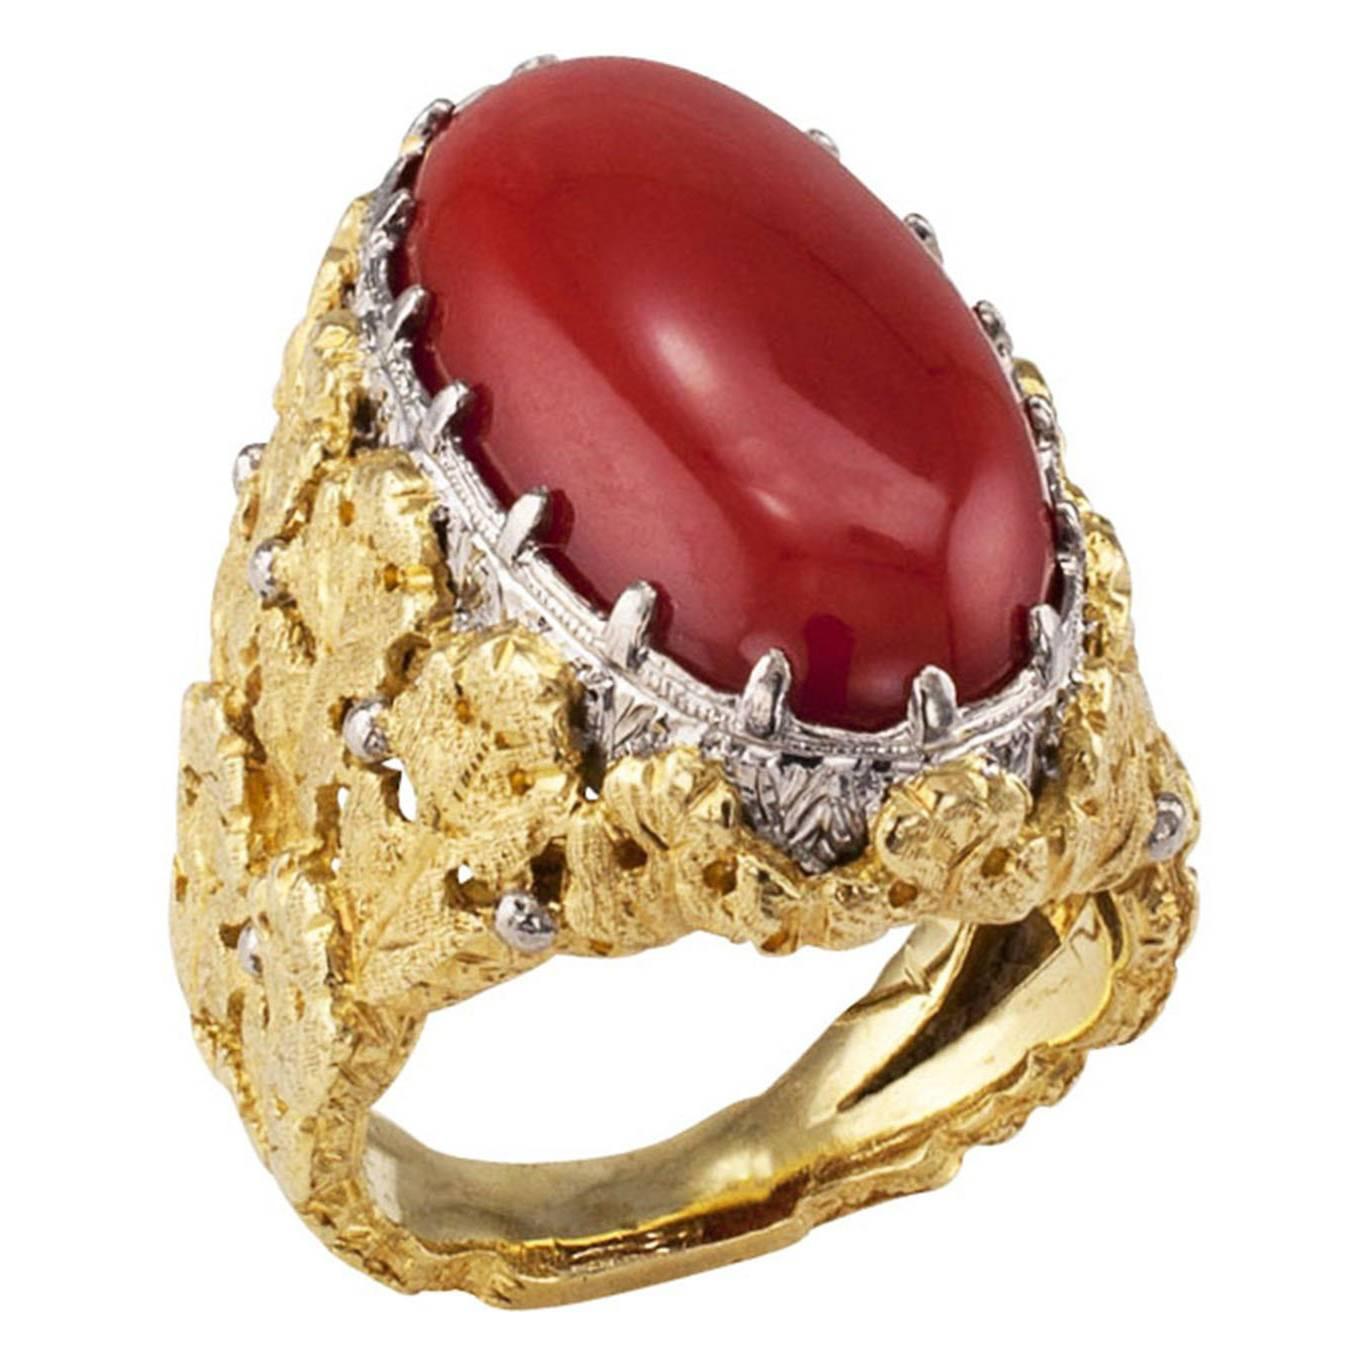 1970 Spritzer and Fuhrman Coral Gold Ring